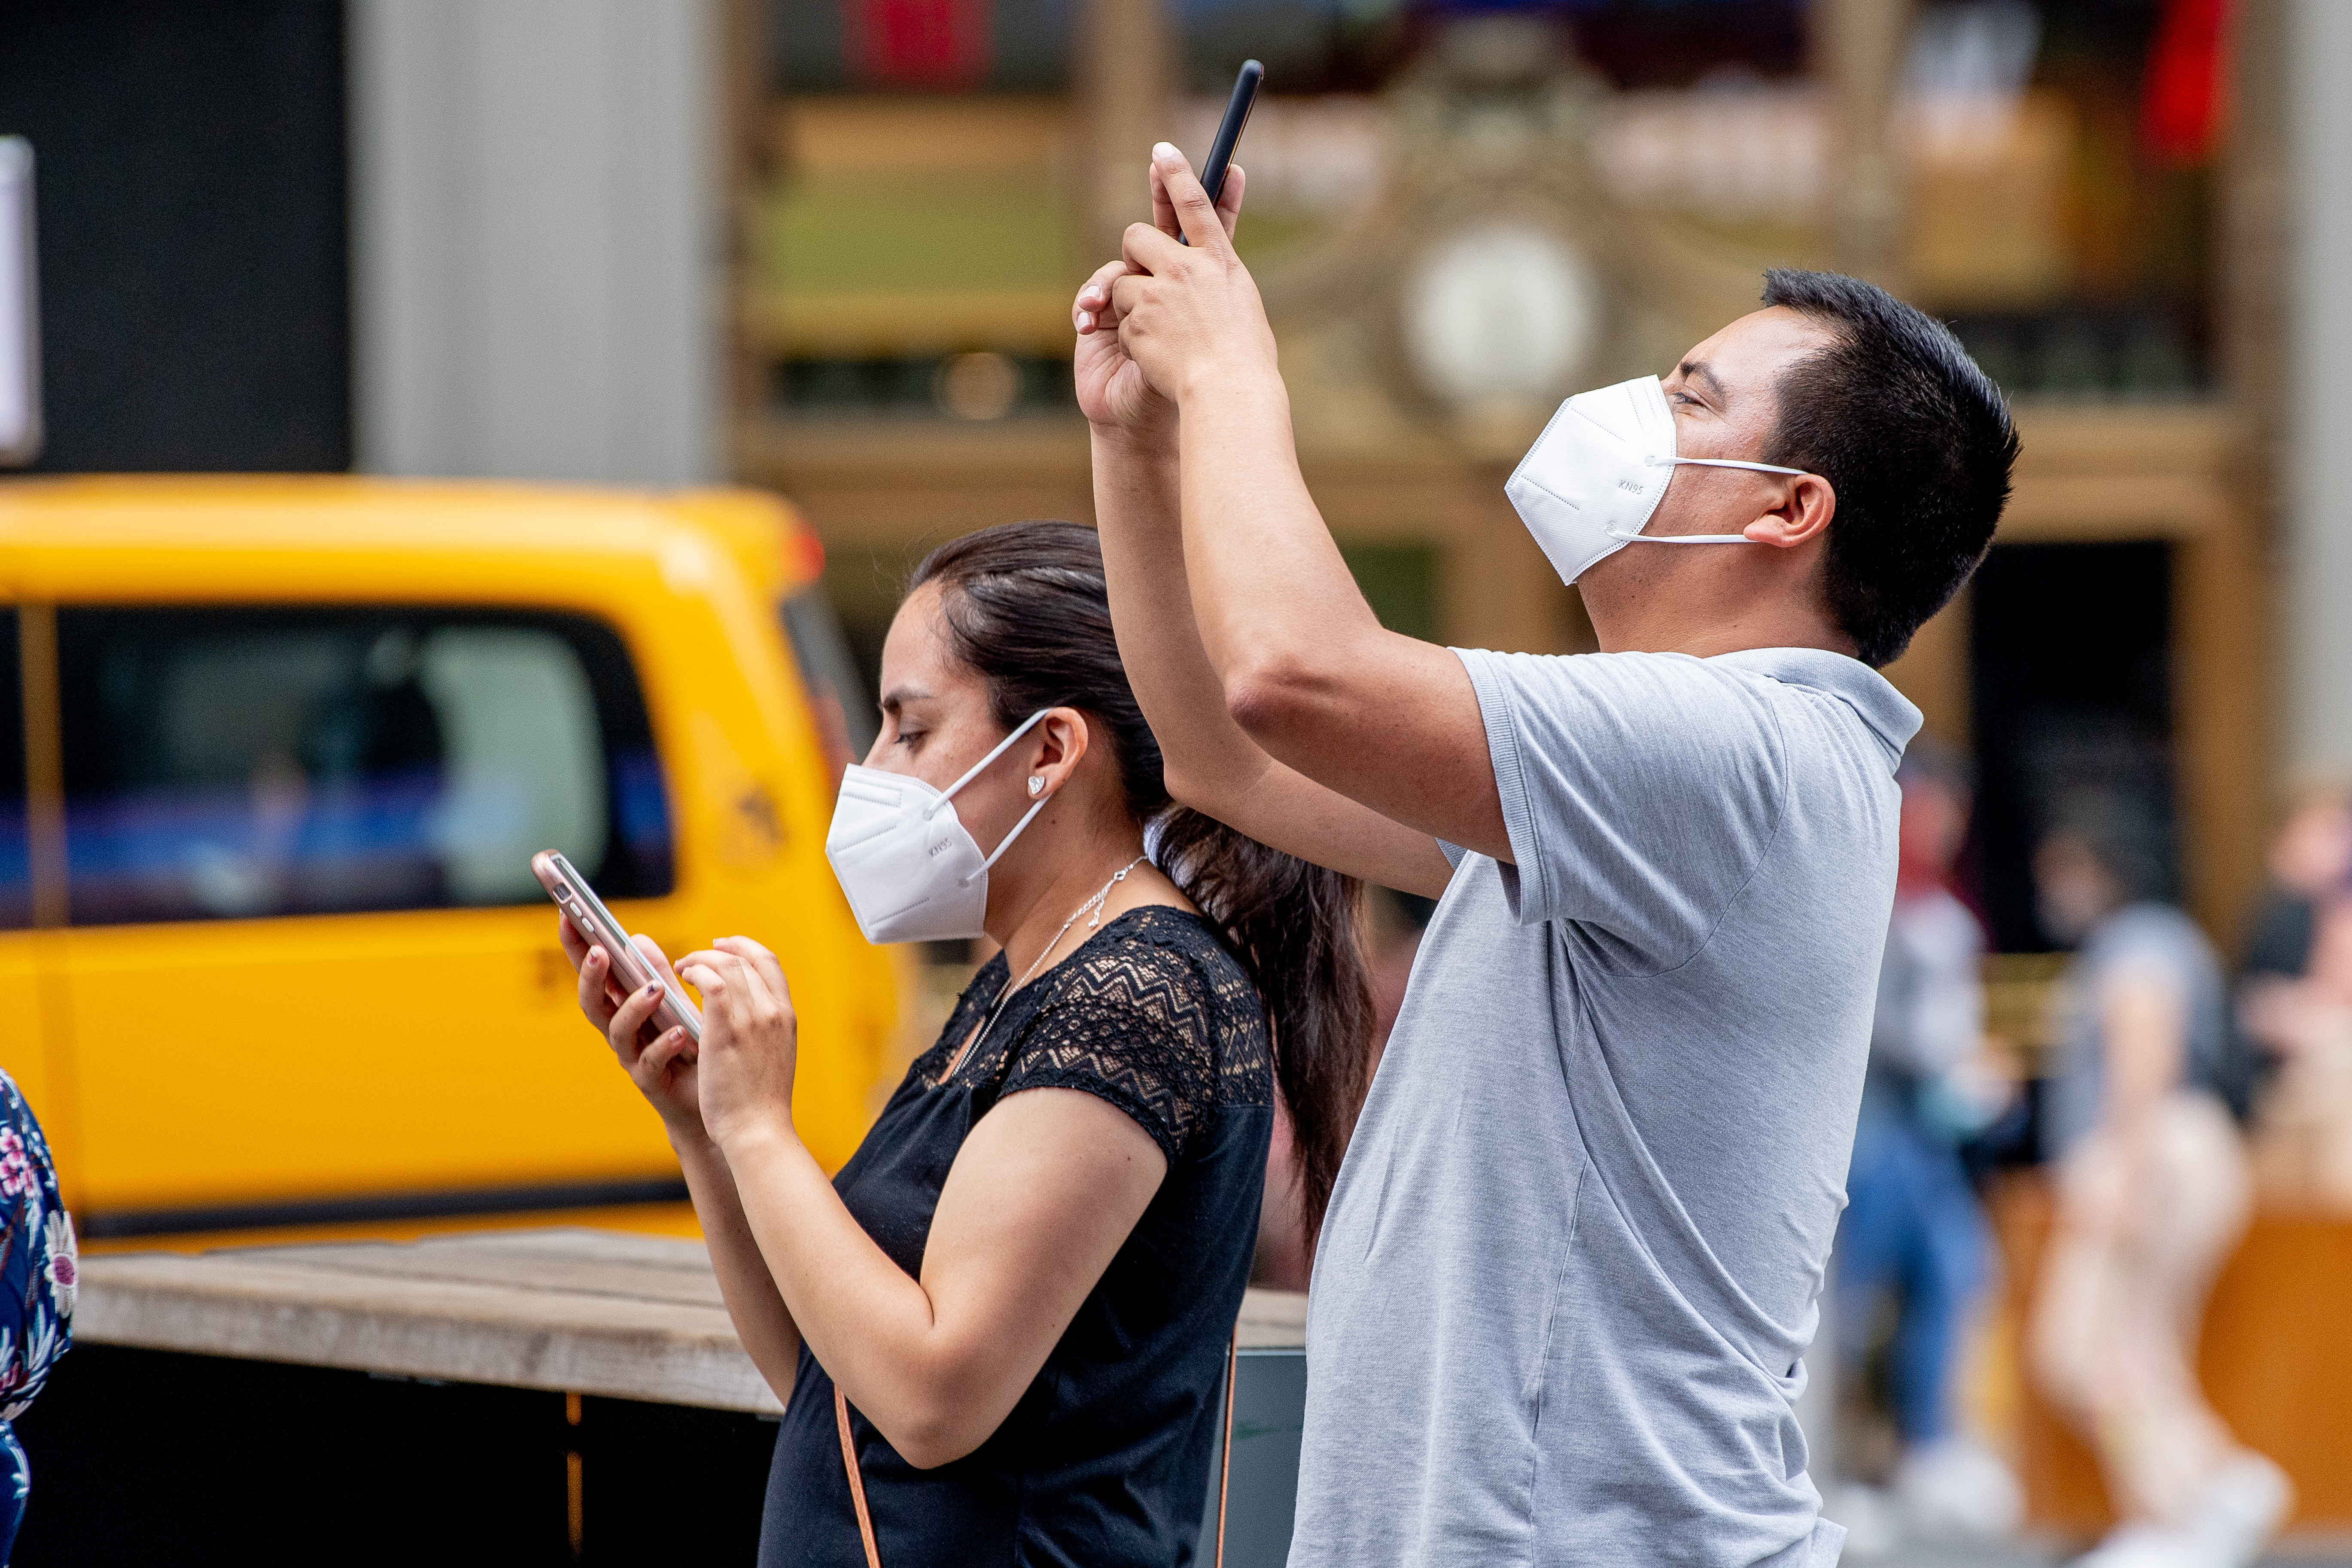 Two people holding phones wear KN95 masks in Times Square, New York City.